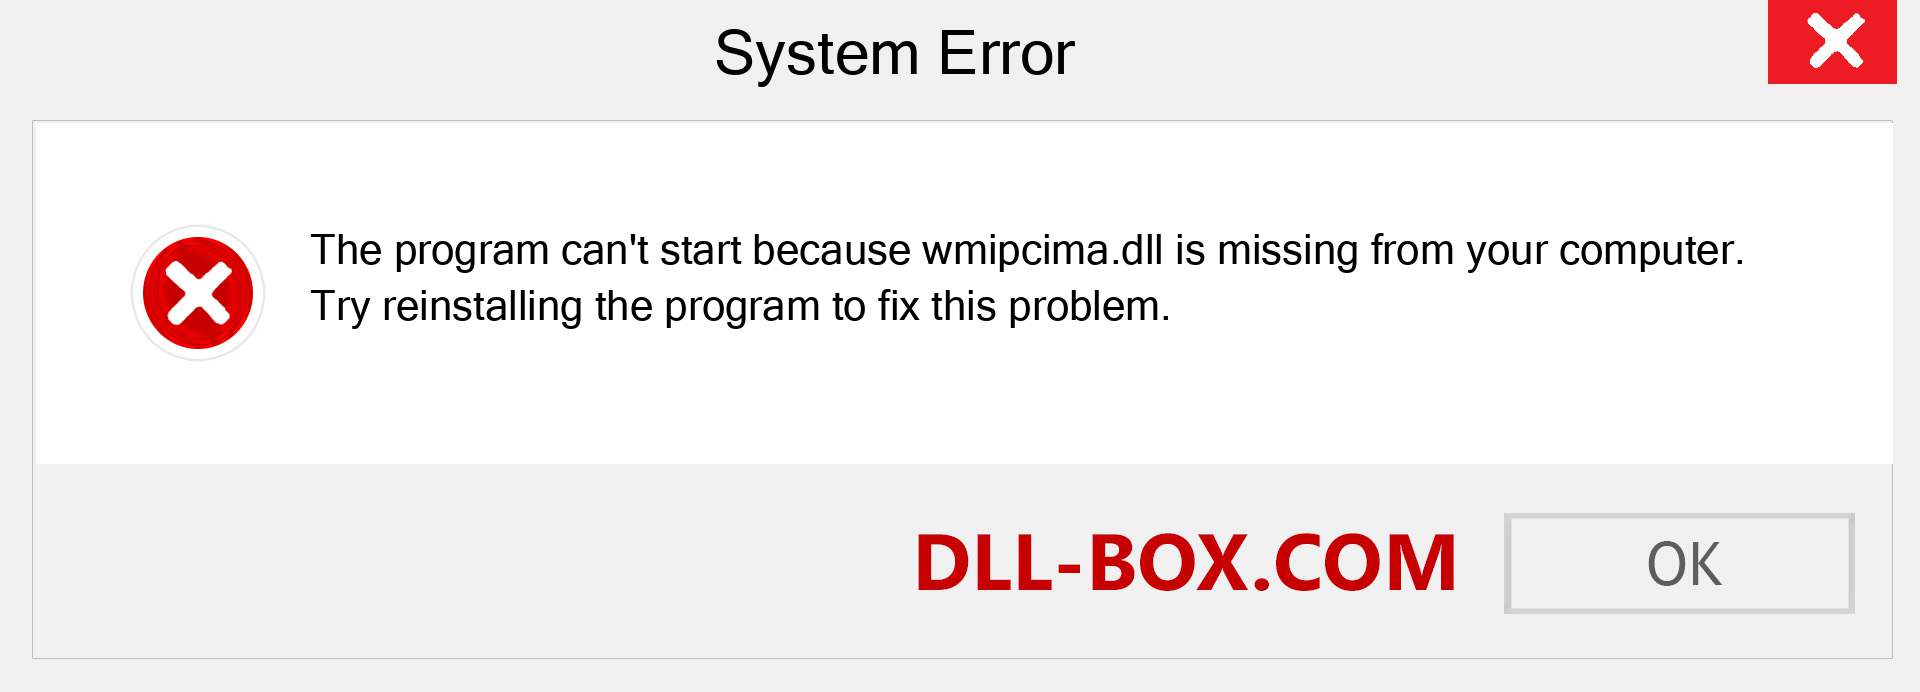  wmipcima.dll file is missing?. Download for Windows 7, 8, 10 - Fix  wmipcima dll Missing Error on Windows, photos, images